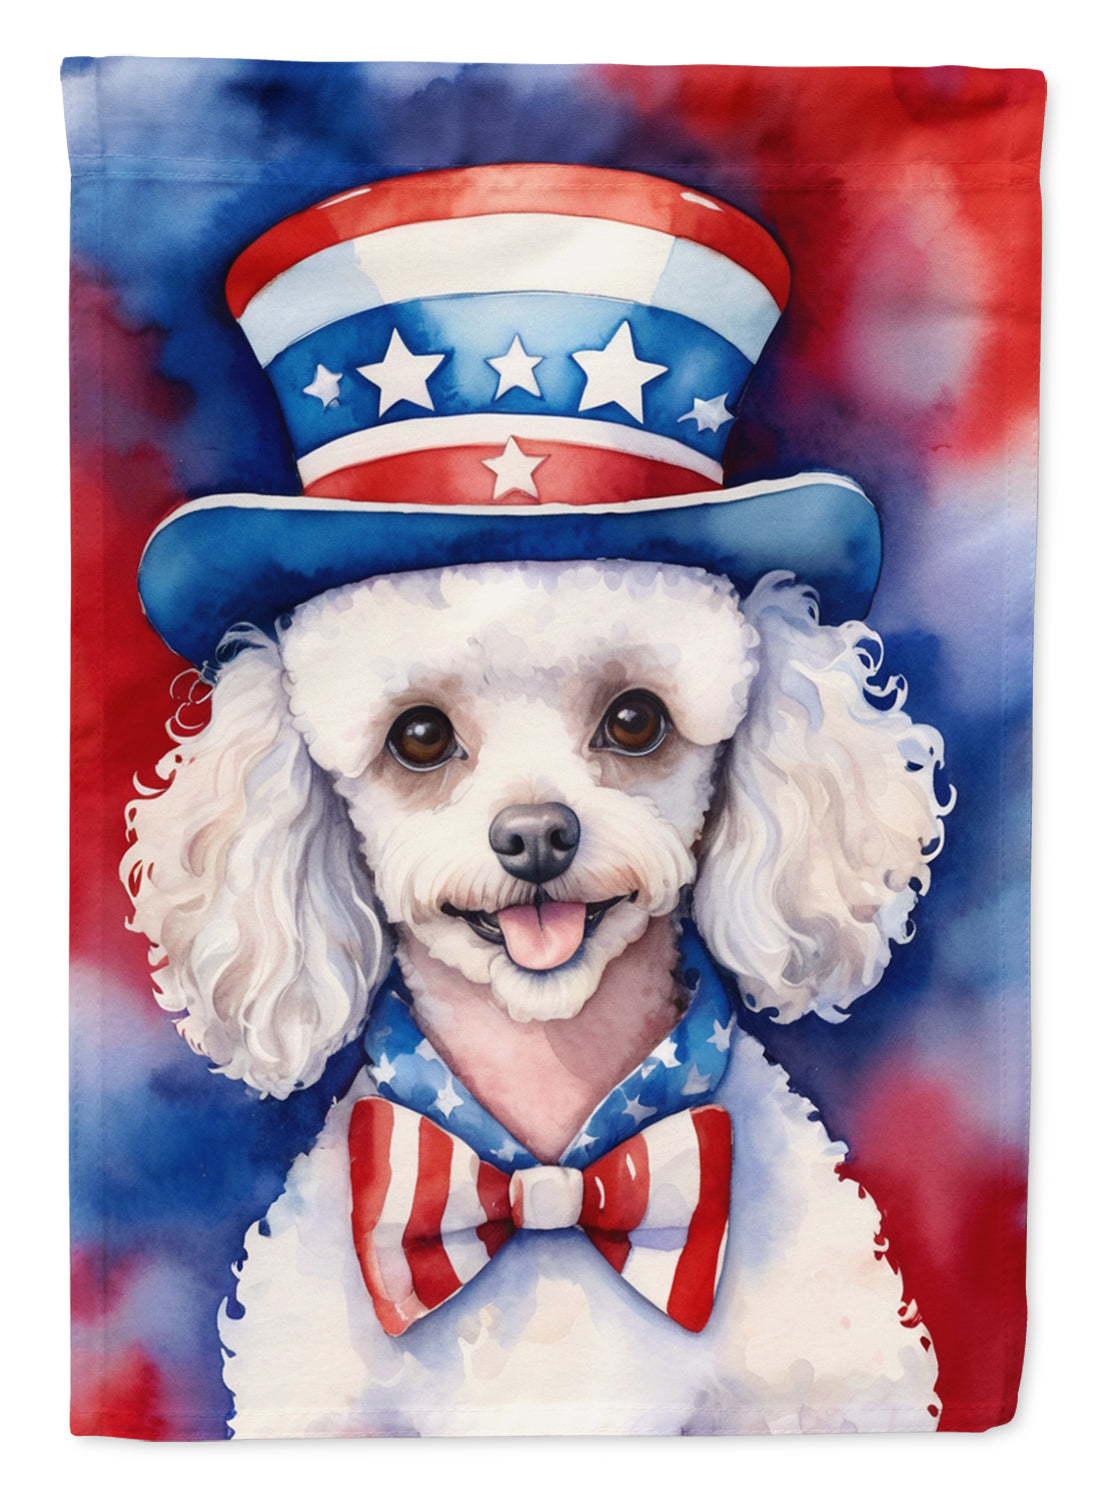 Buy this White Poodle Patriotic American House Flag